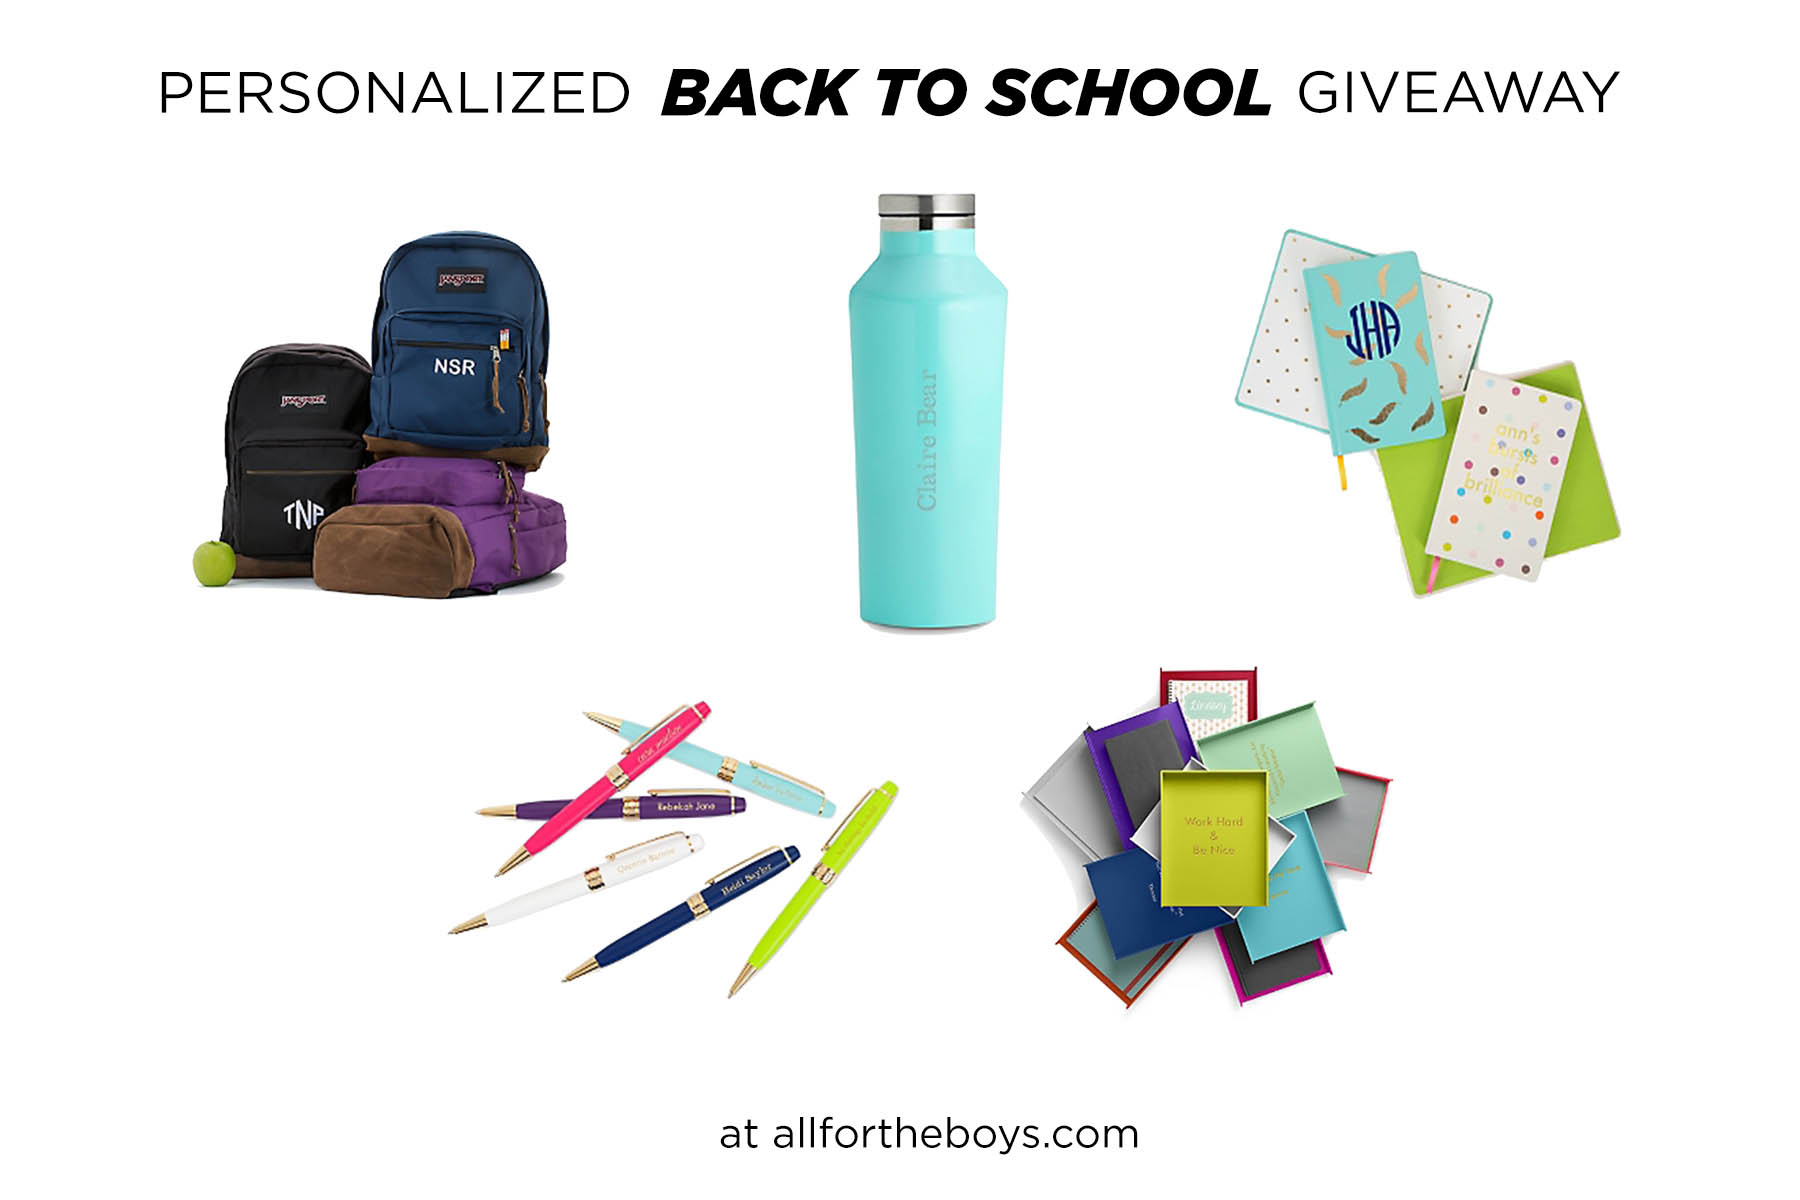 Personalized back to school giveaway!